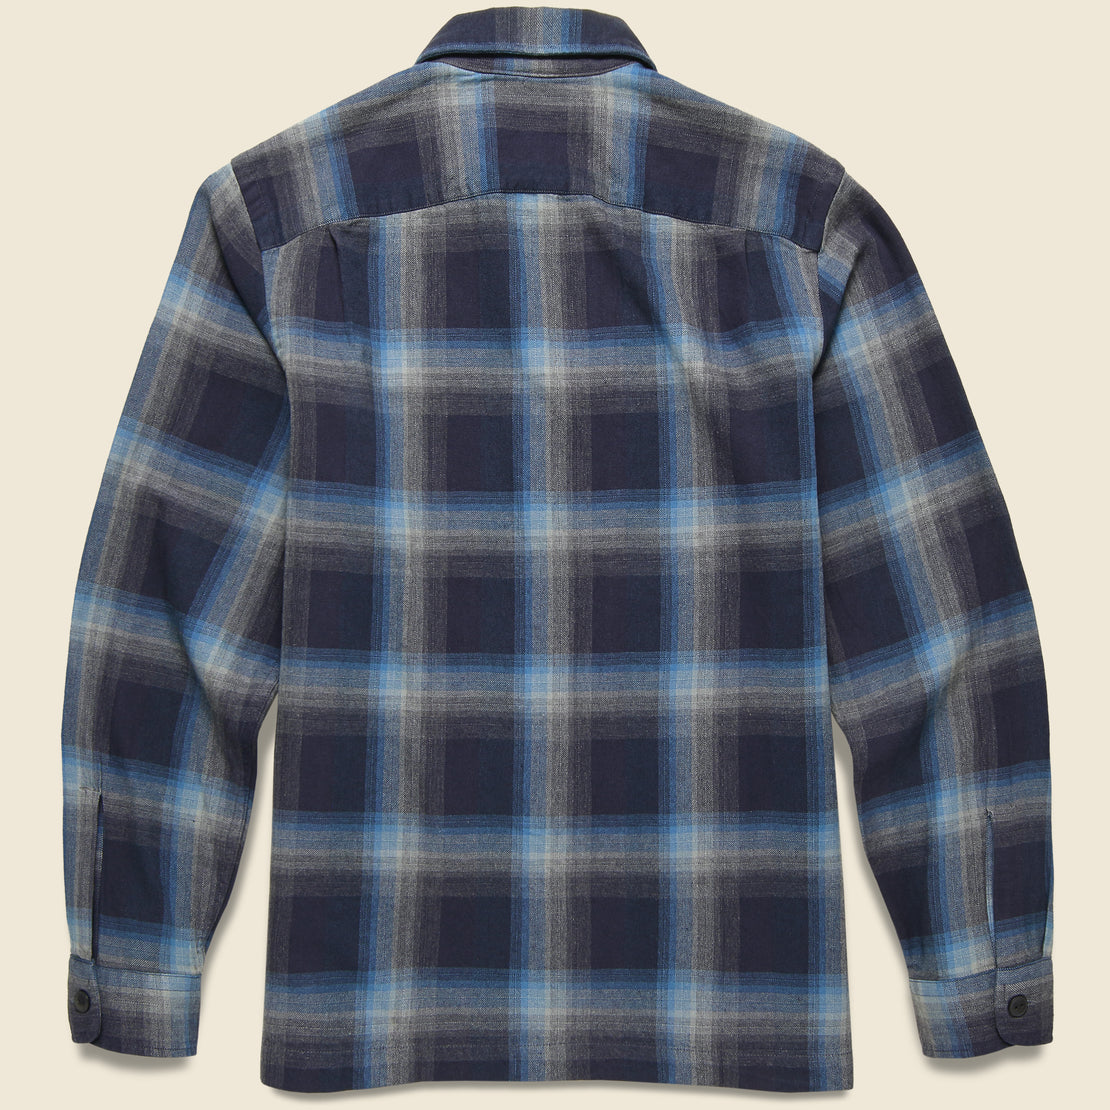 Towns Camp Shirt - Black/Blue - RRL - STAG Provisions - Tops - L/S Woven - Plaid